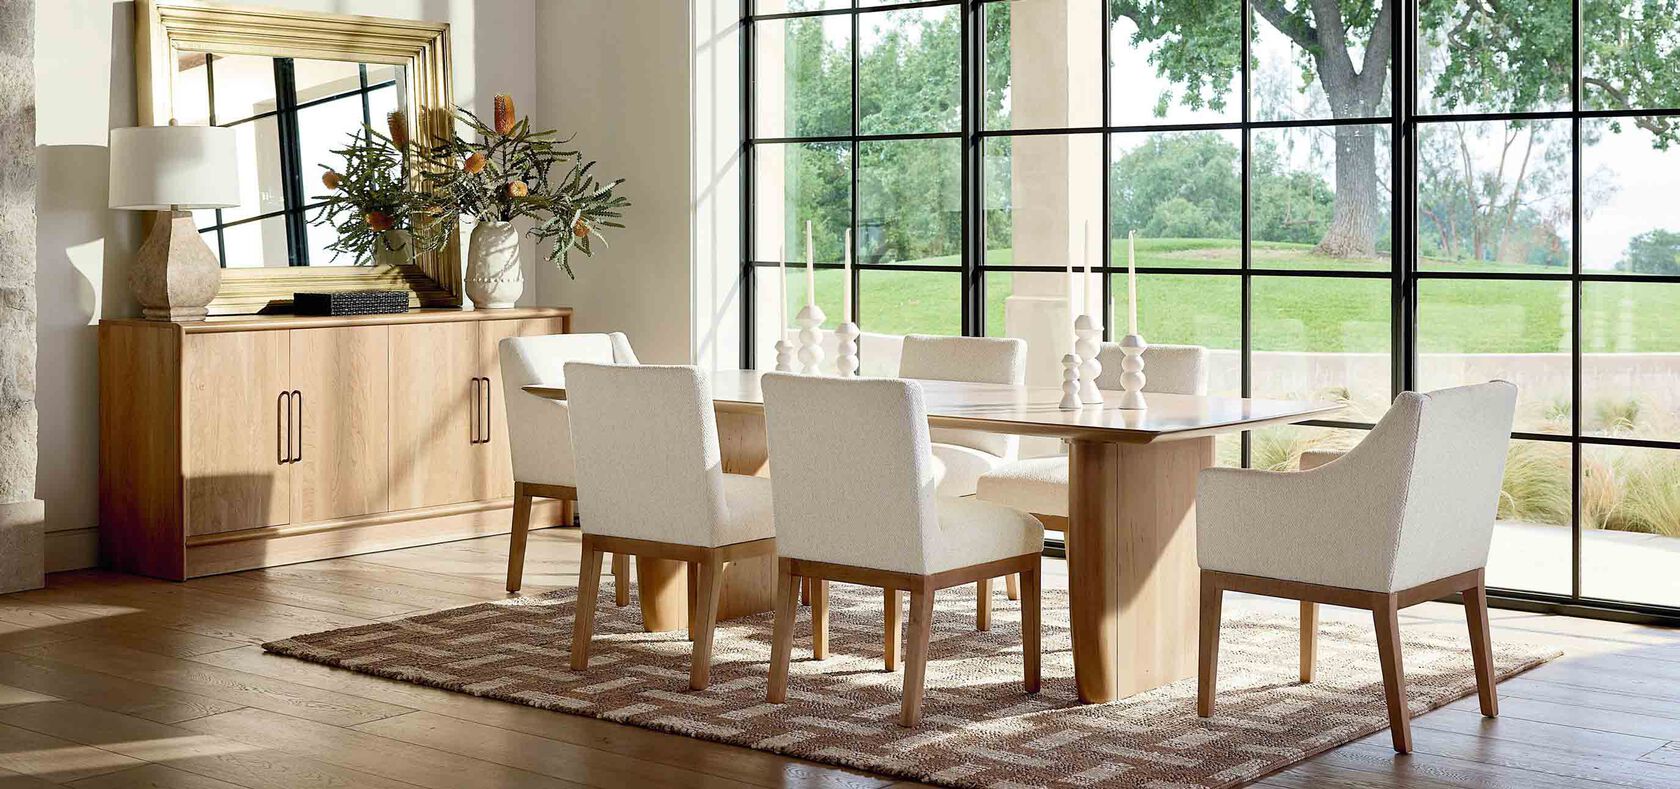 Dresden dining table with upholstered chairs